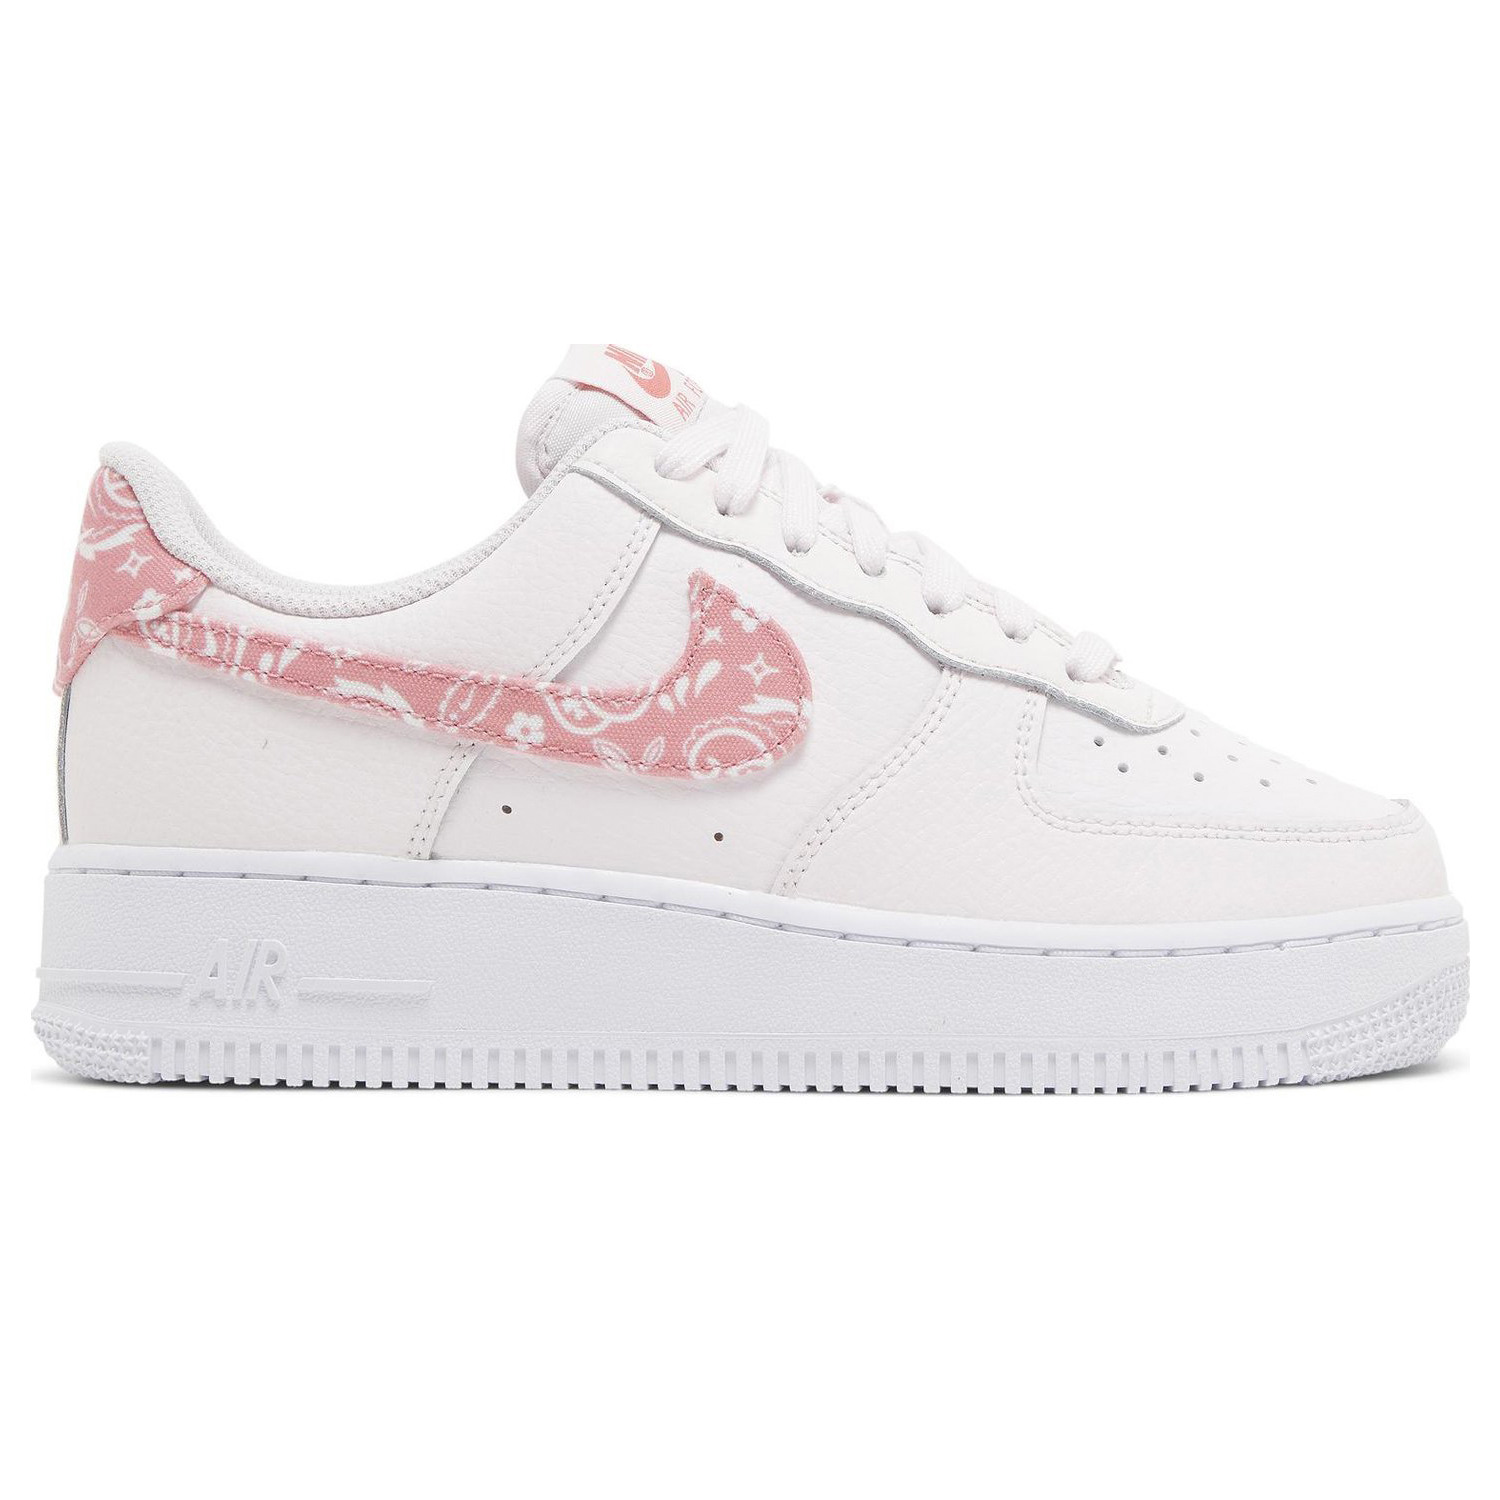 Кроссовки Nike Wmns Air Force 1 '07 'Pink Paisley', Розовый кроссовки nike wmns air force 1 07 essential university blue concord белый